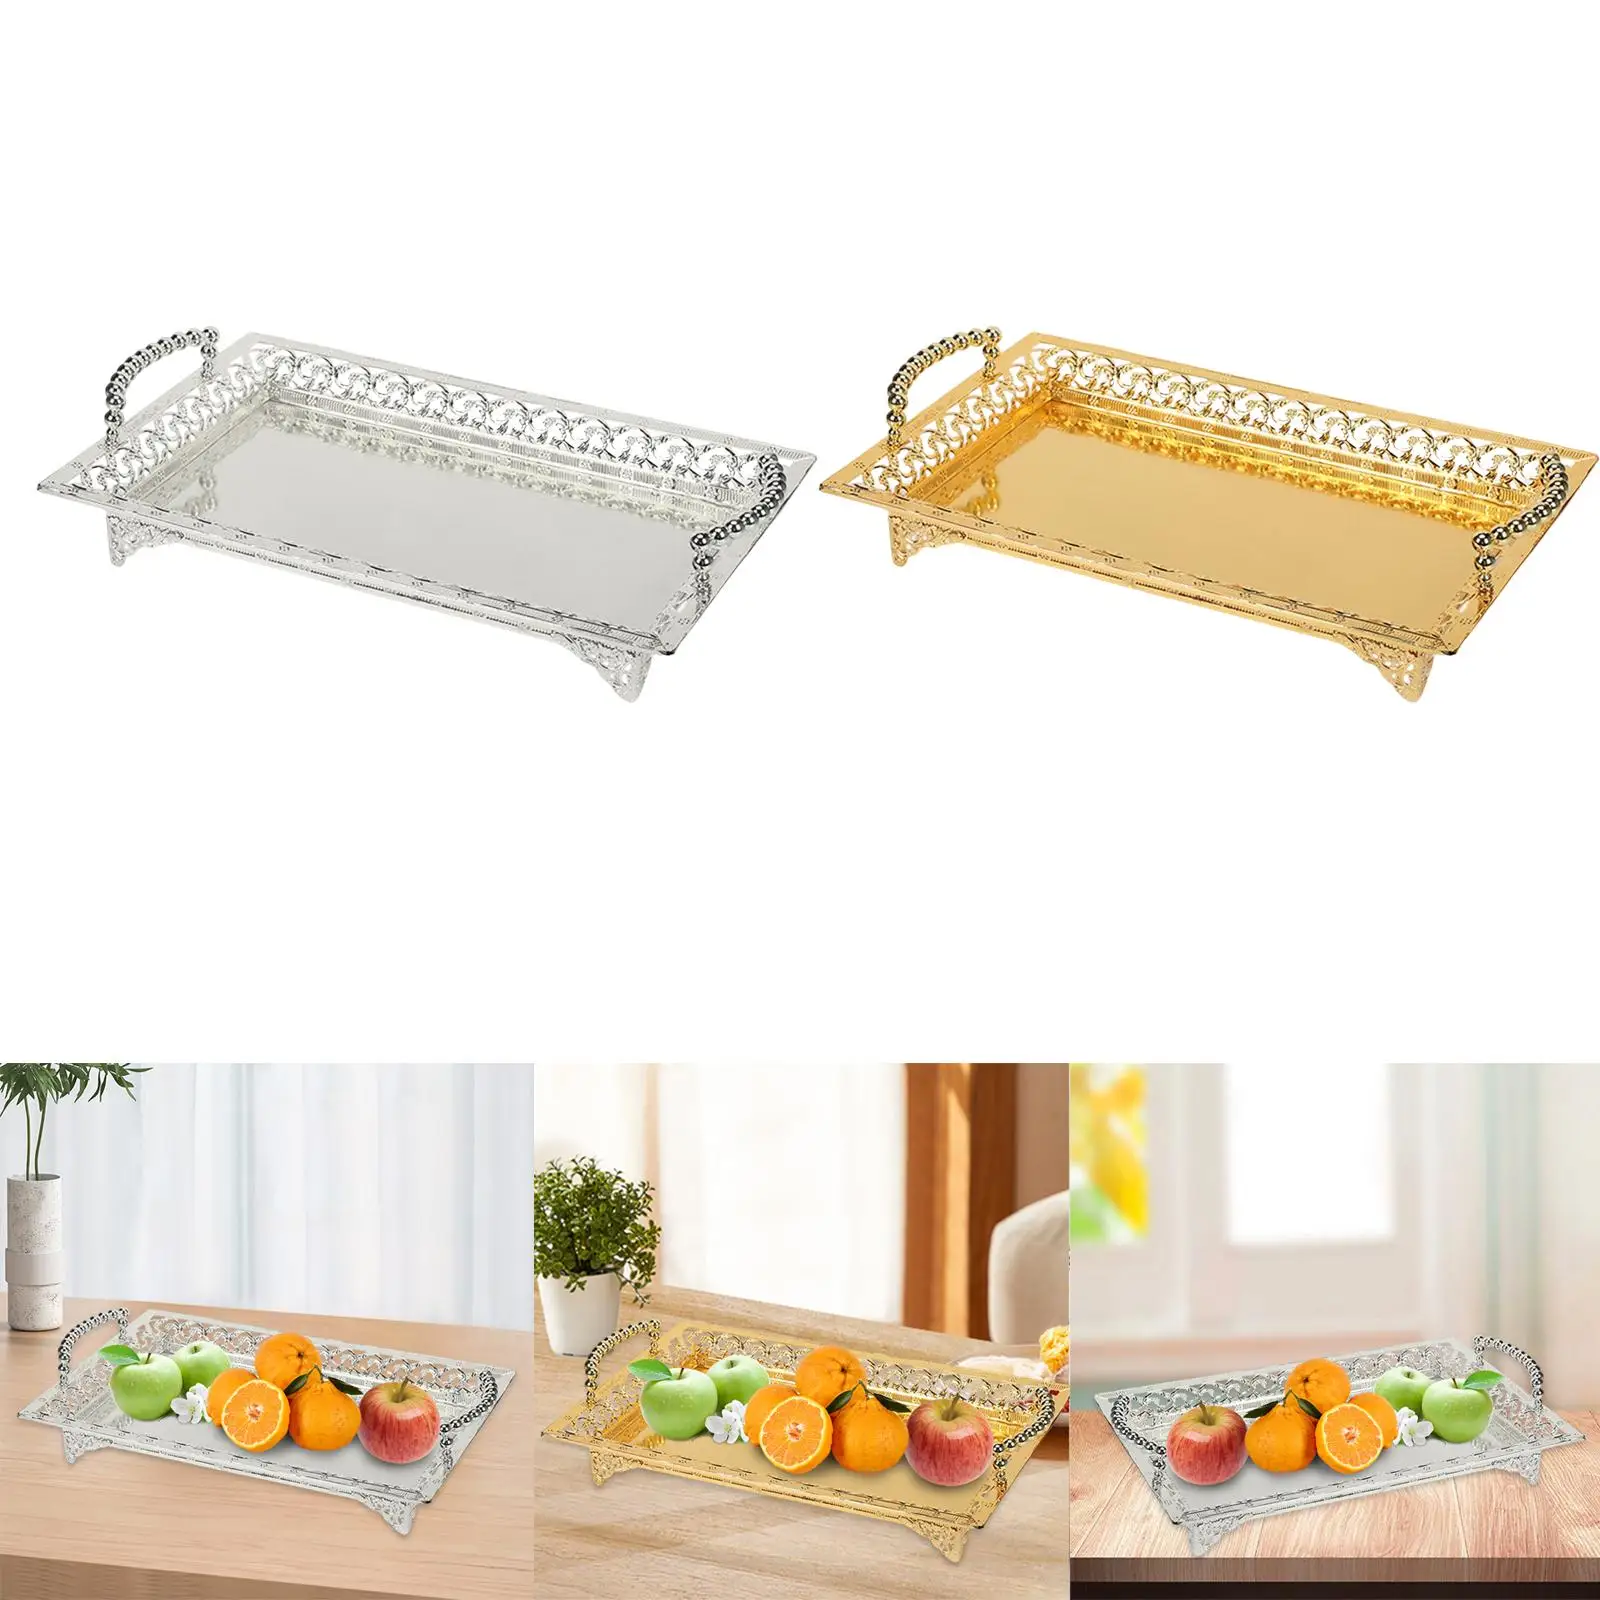 Nordic Style Fruit Storage Basket Storage Container Serving Platter Rectangle Serving Tray for Home kitchen Dessert Snack